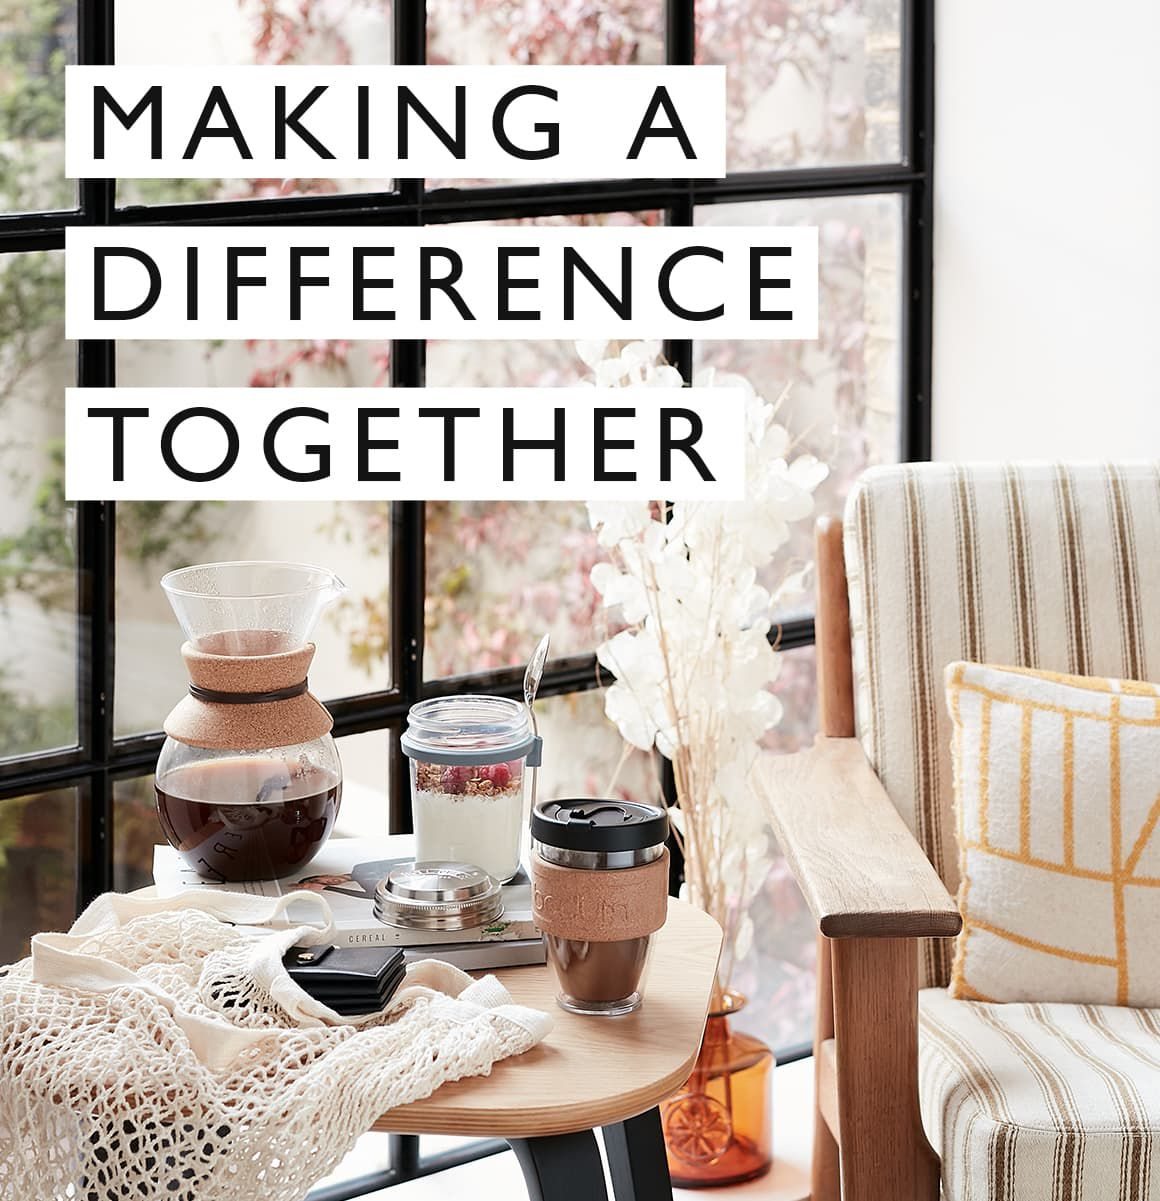 Making a difference together